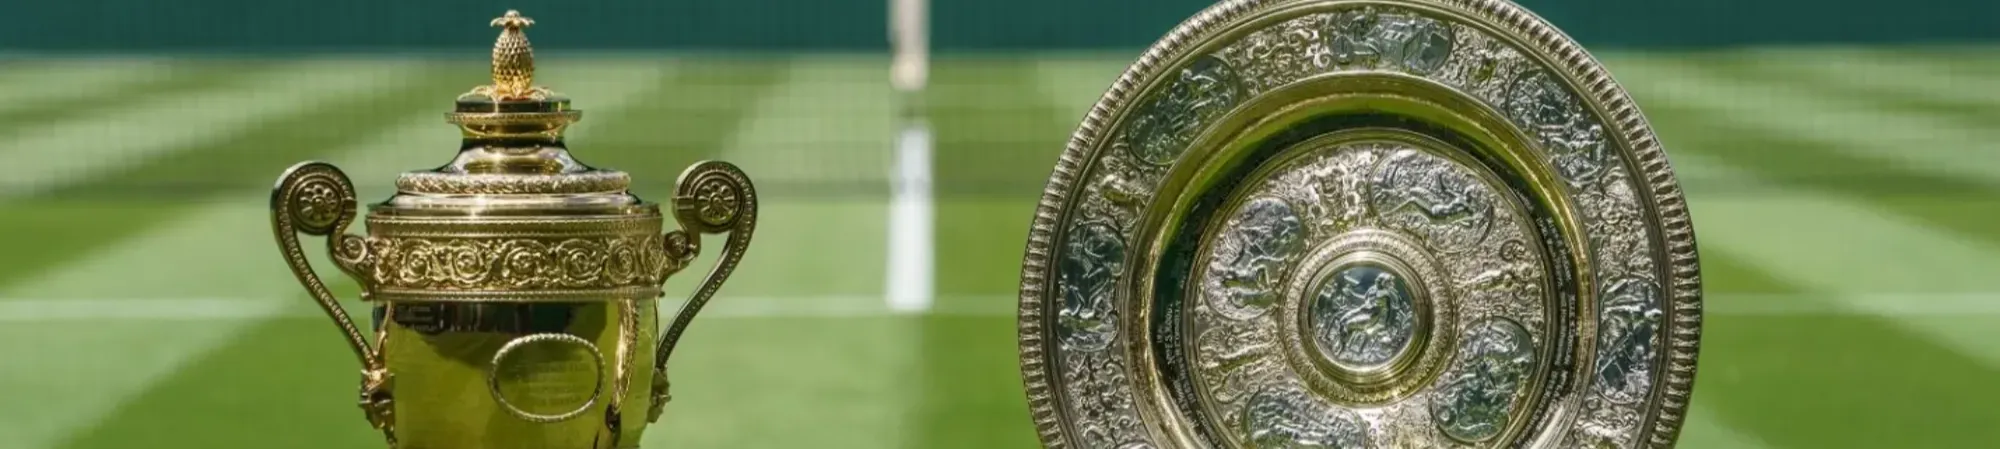 The Wimbledon Championships (and how to be part of it in 2024) - Tràng An  Golf Clubs